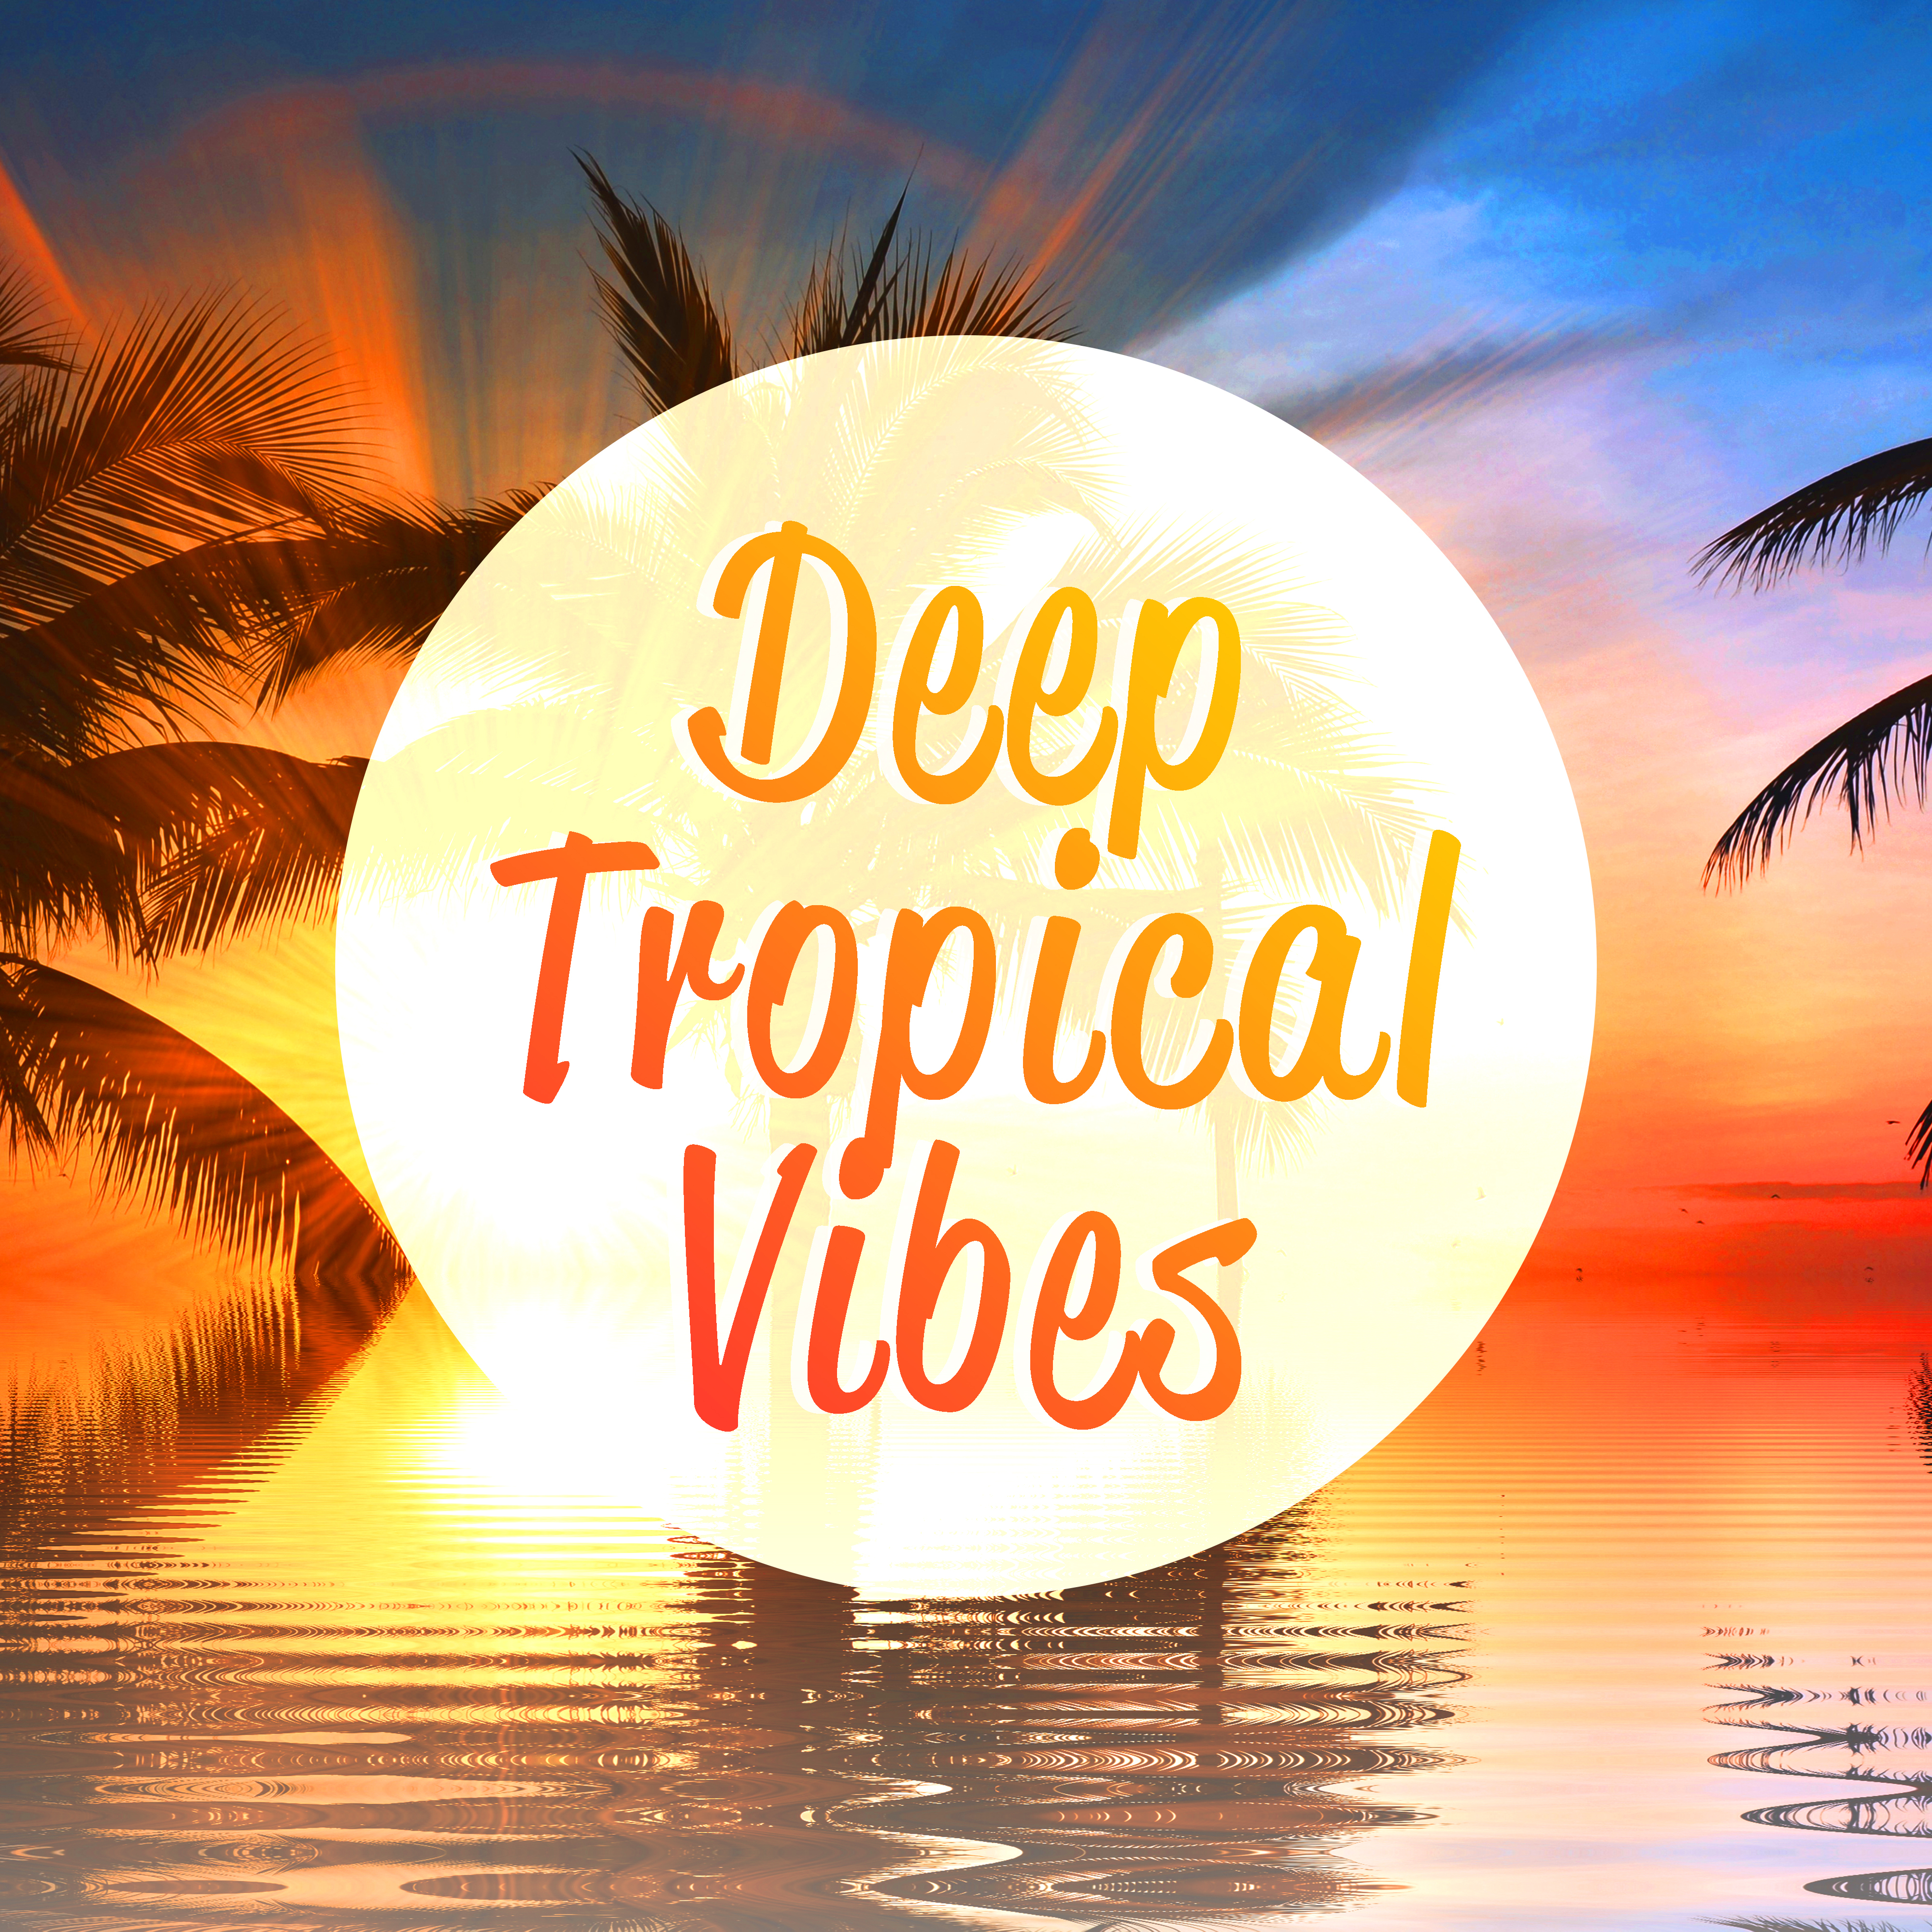 Deep Tropical Vibes – Summer Chill Out Music, Sounds to Relax, Tropical Beach Beats